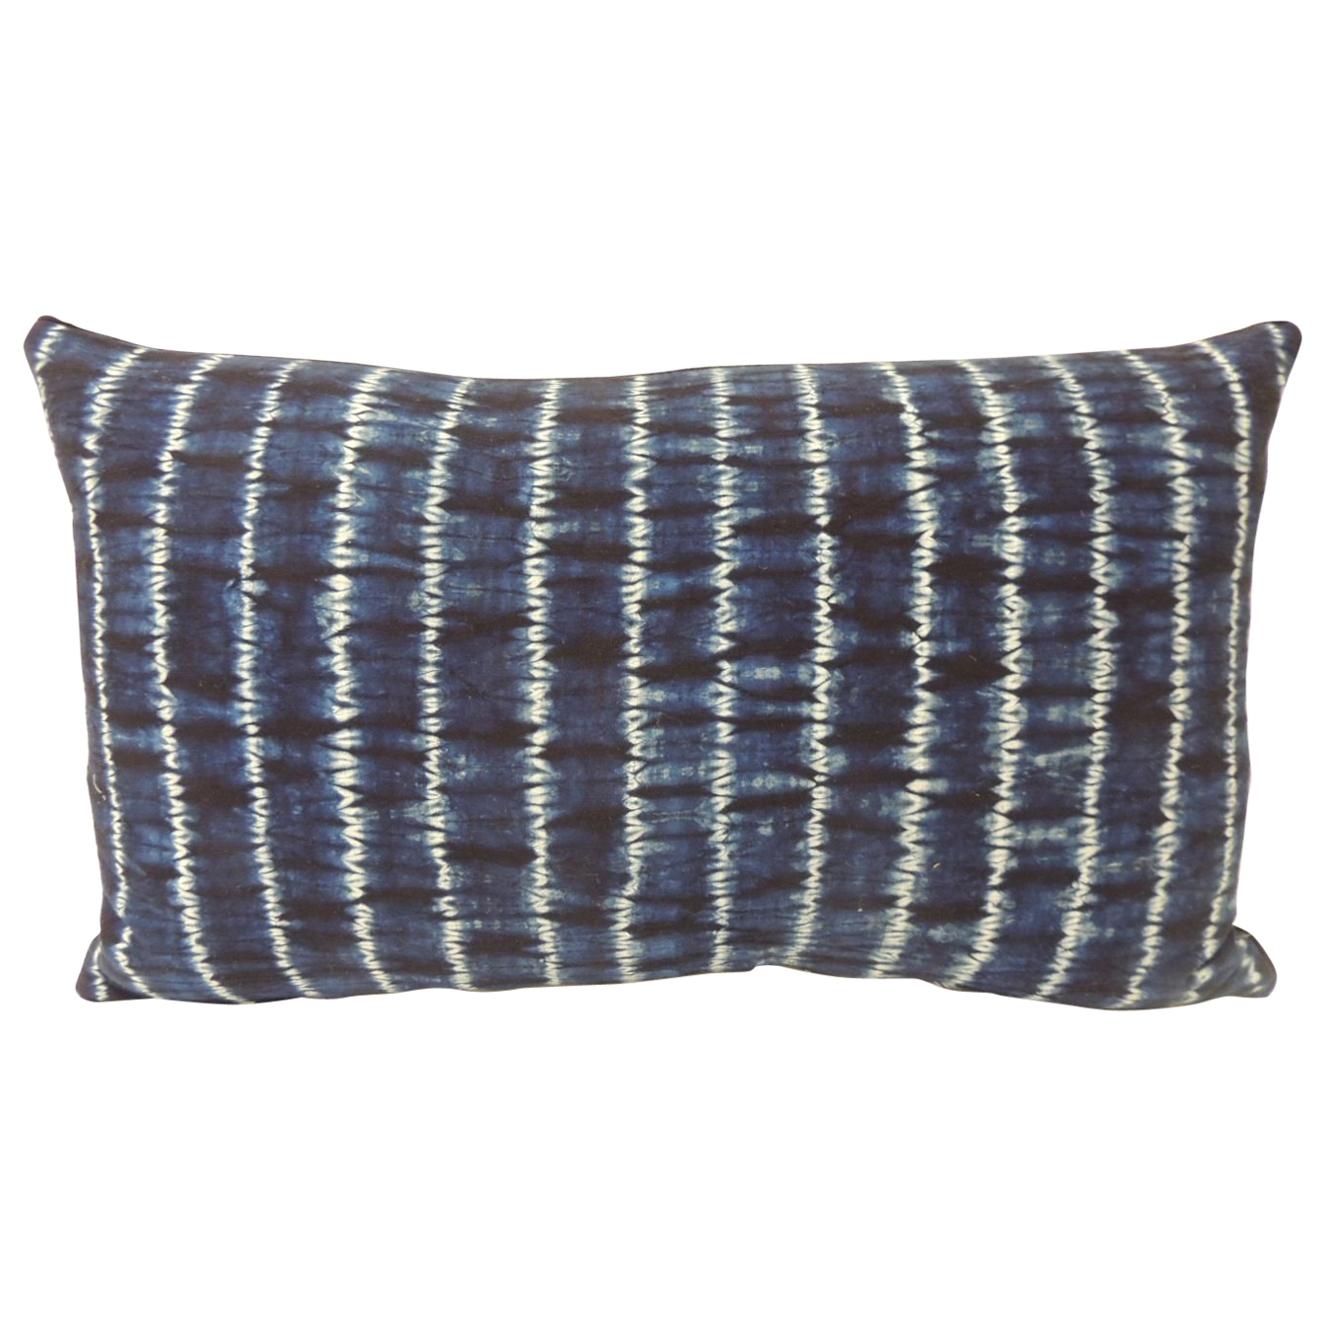 Vintage Indigo and White African Resist-Dyed Textile Decorative Pillow For Sale